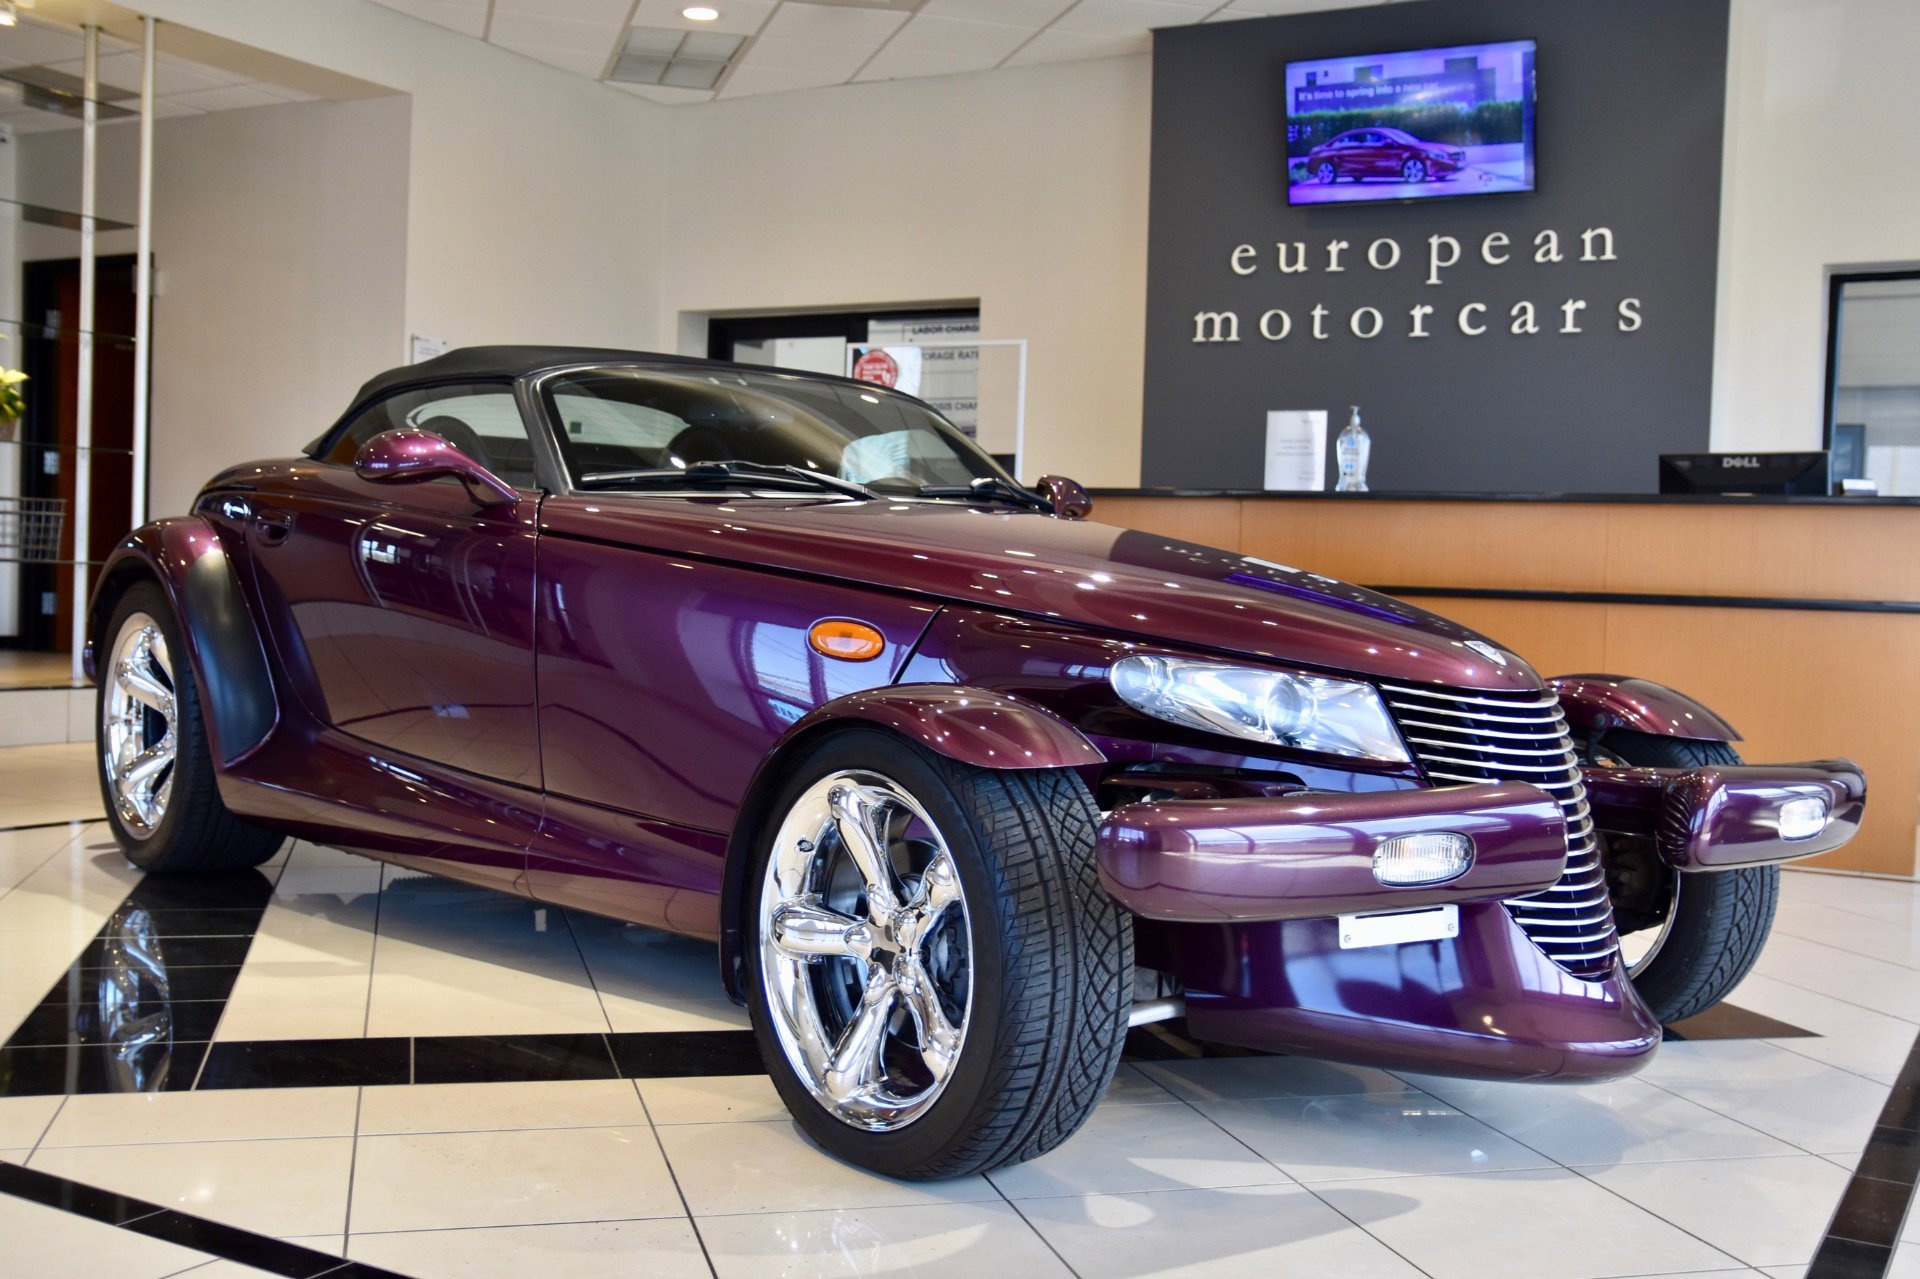 Plymouth Prowler, Used model, For sale, Autotrader, 1920x1280 HD Desktop